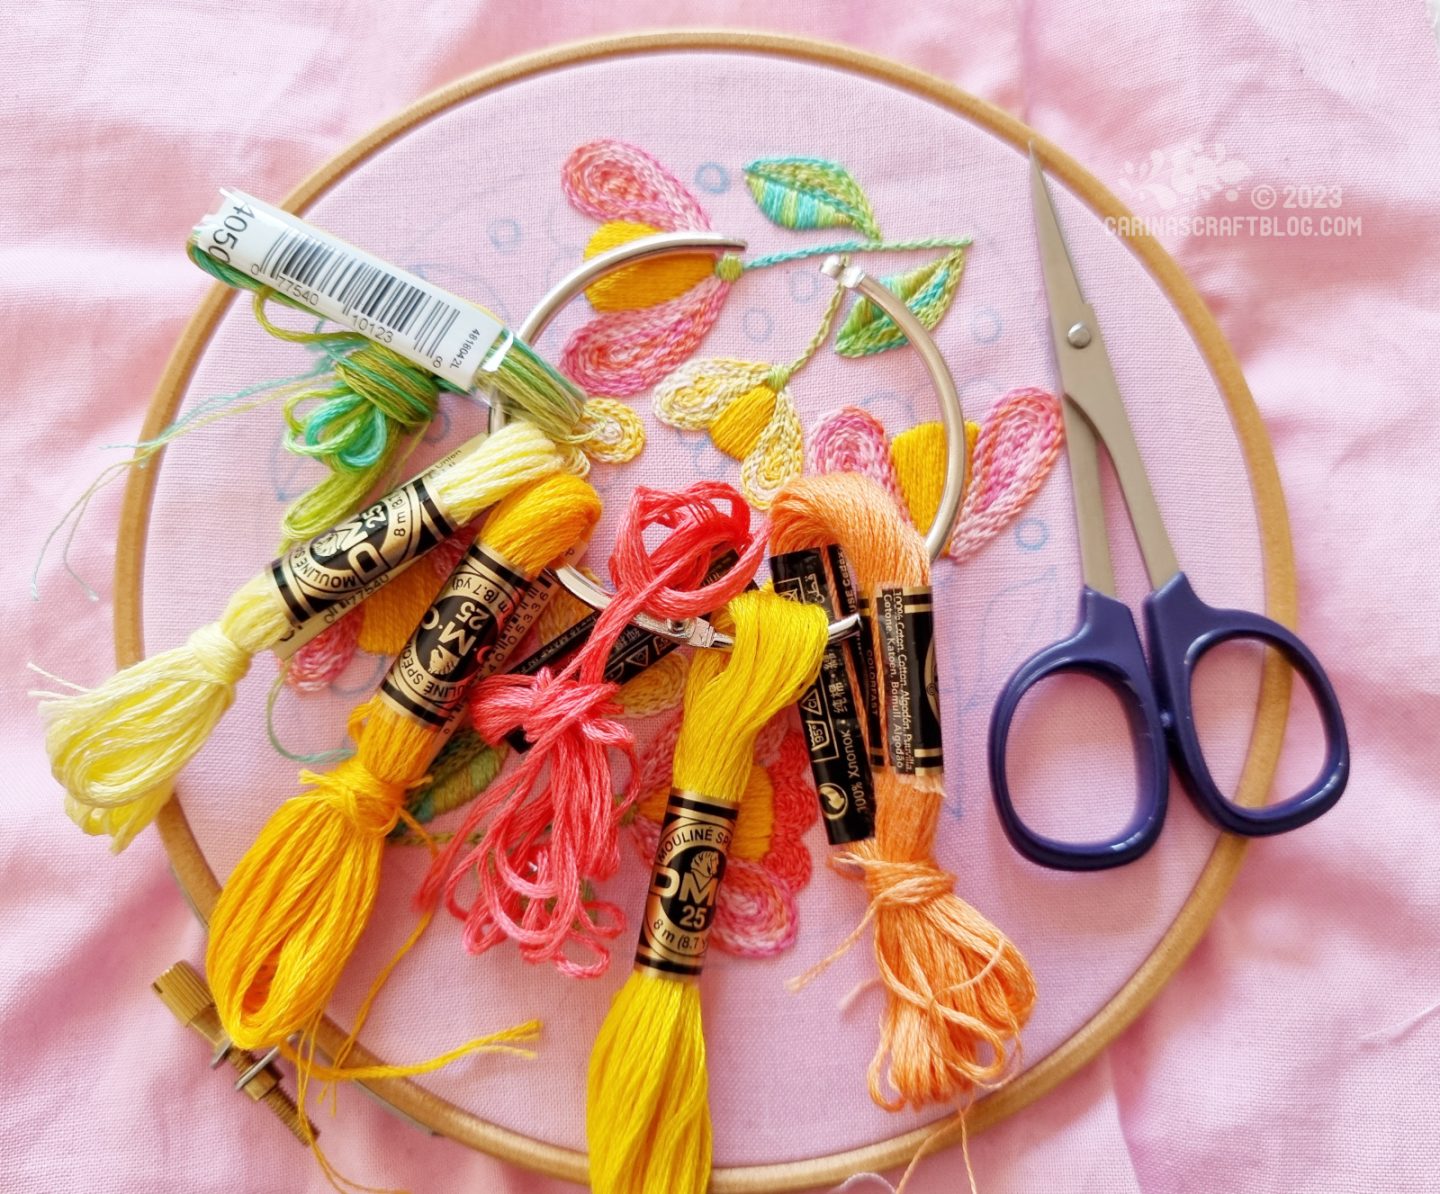 In the background is an embroidery hoop with pink fabric. On top of the fabric is a pair of embroidery scissors and a book binding ring with several skeins of embroidery thread attached to it.